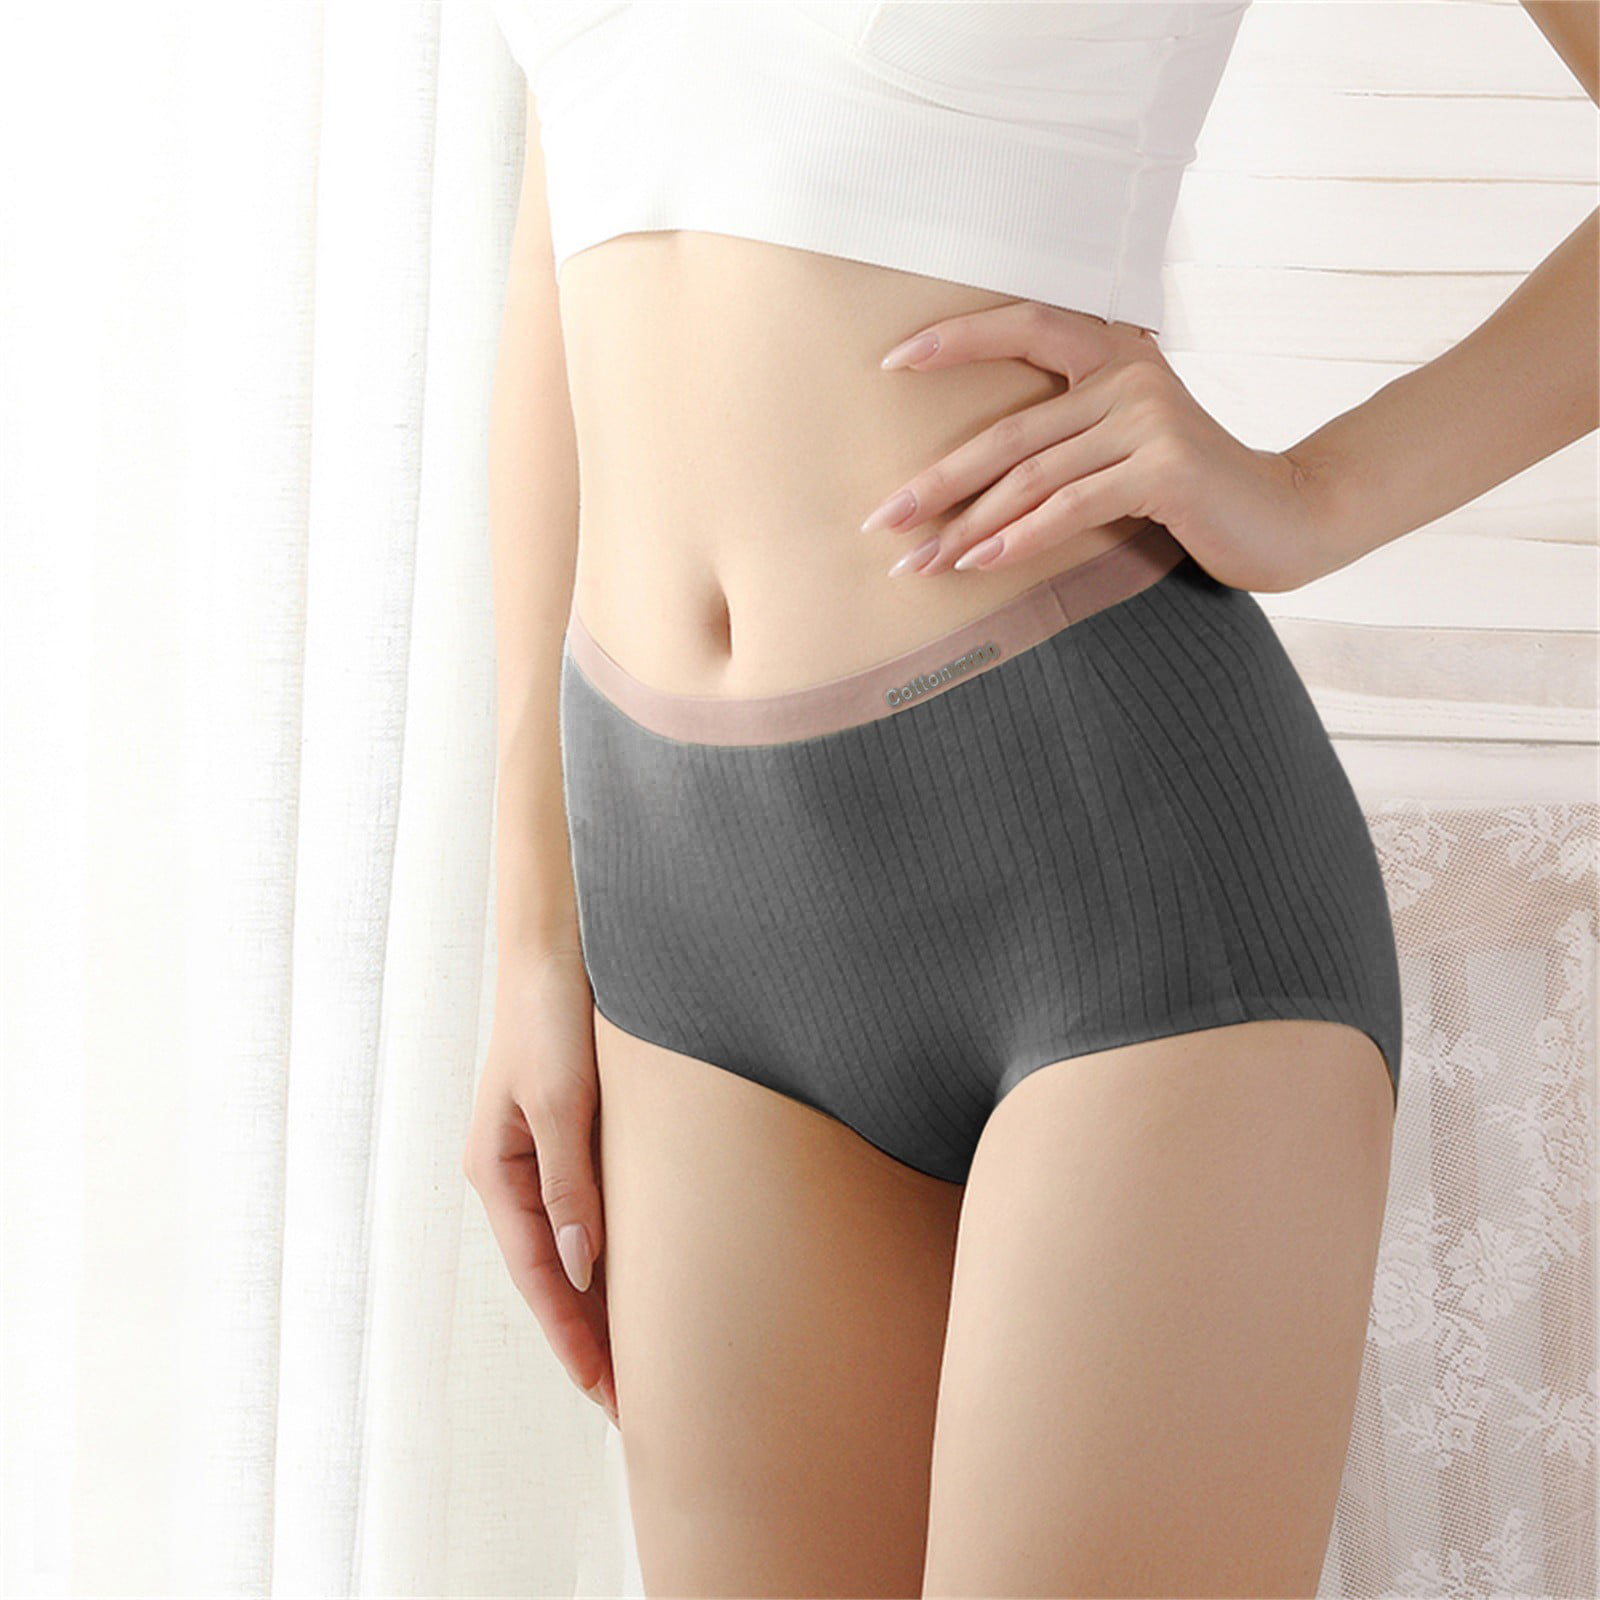 Womens Cotton Briefs Underwear without Elastic Leg Openings